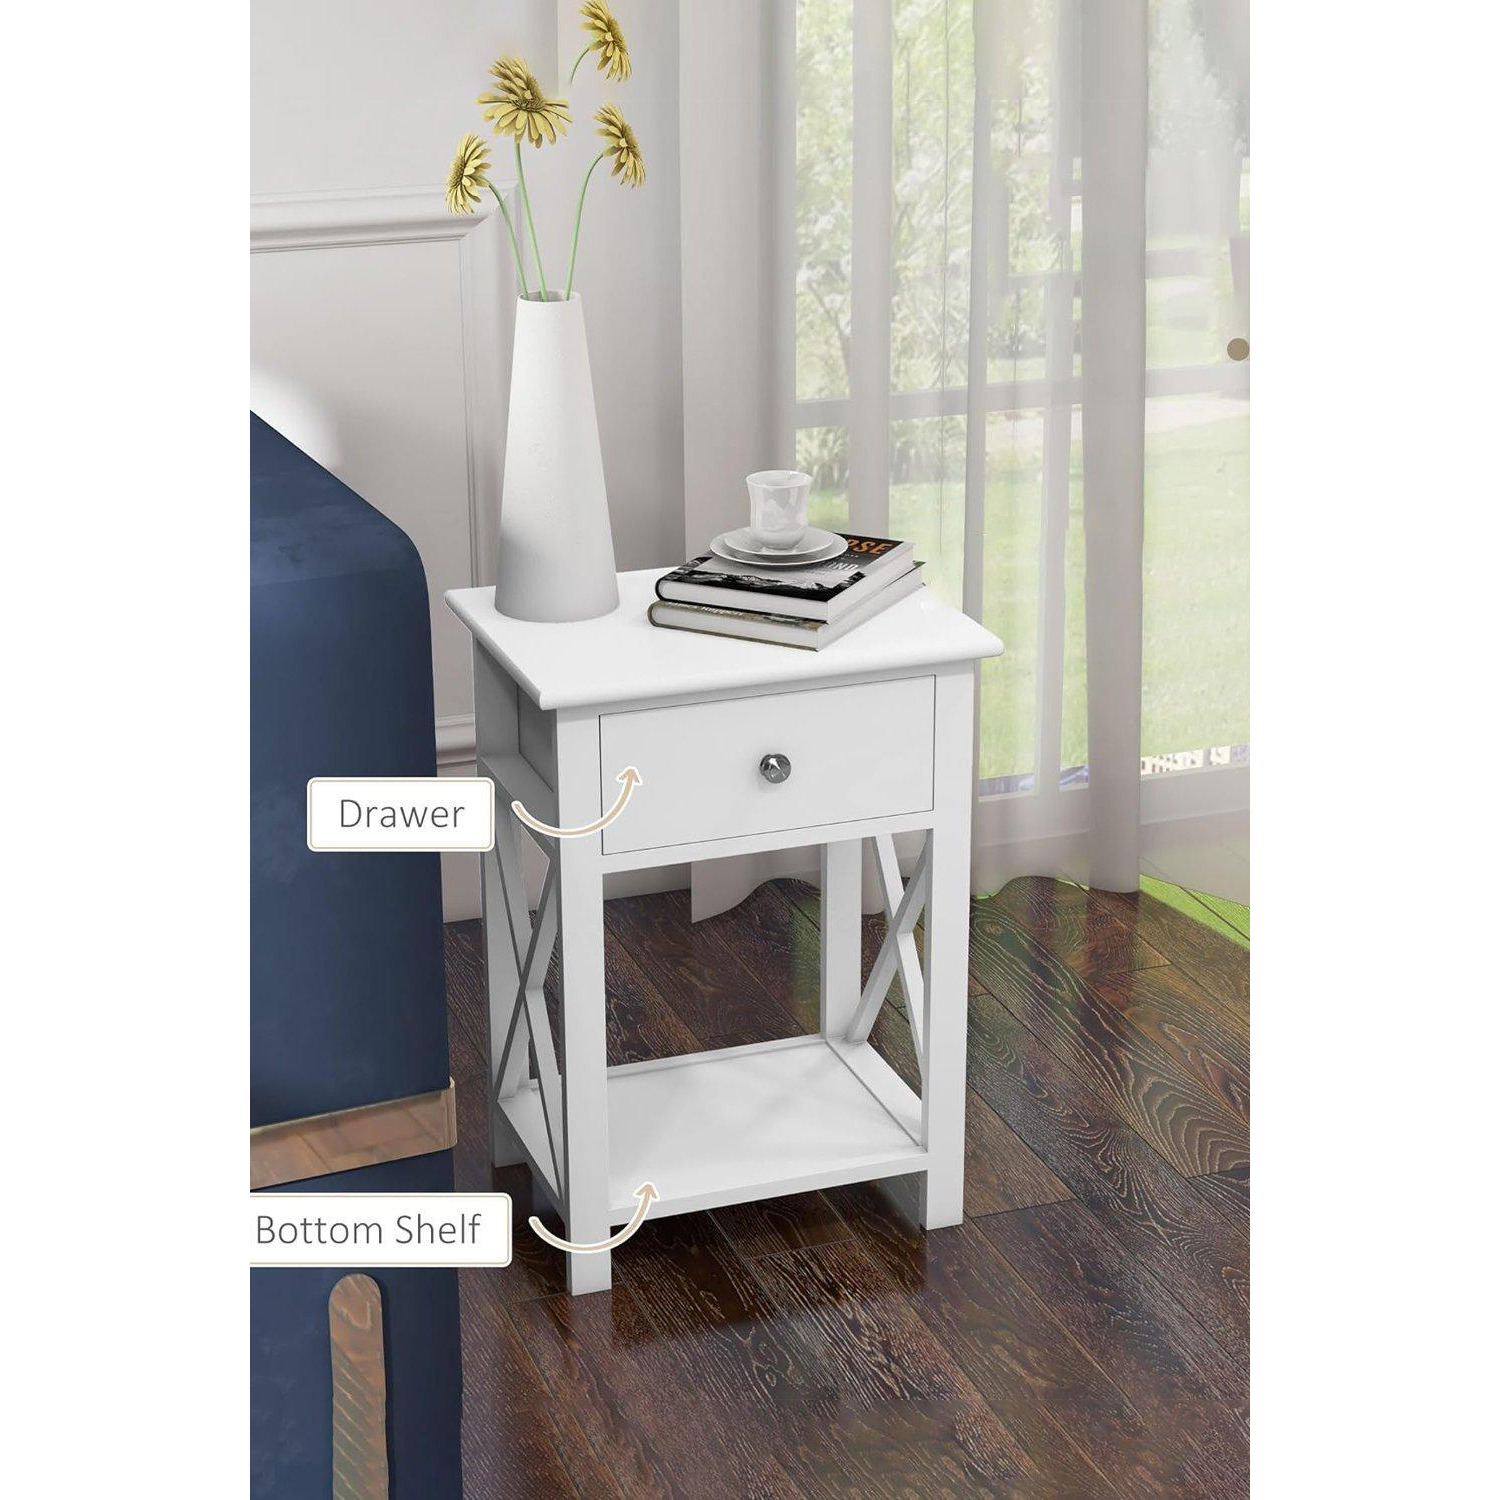 2-Tier Drawer Nightstand Wooden  Bedside Table with Storage Shelf 55.5cm H - image 1